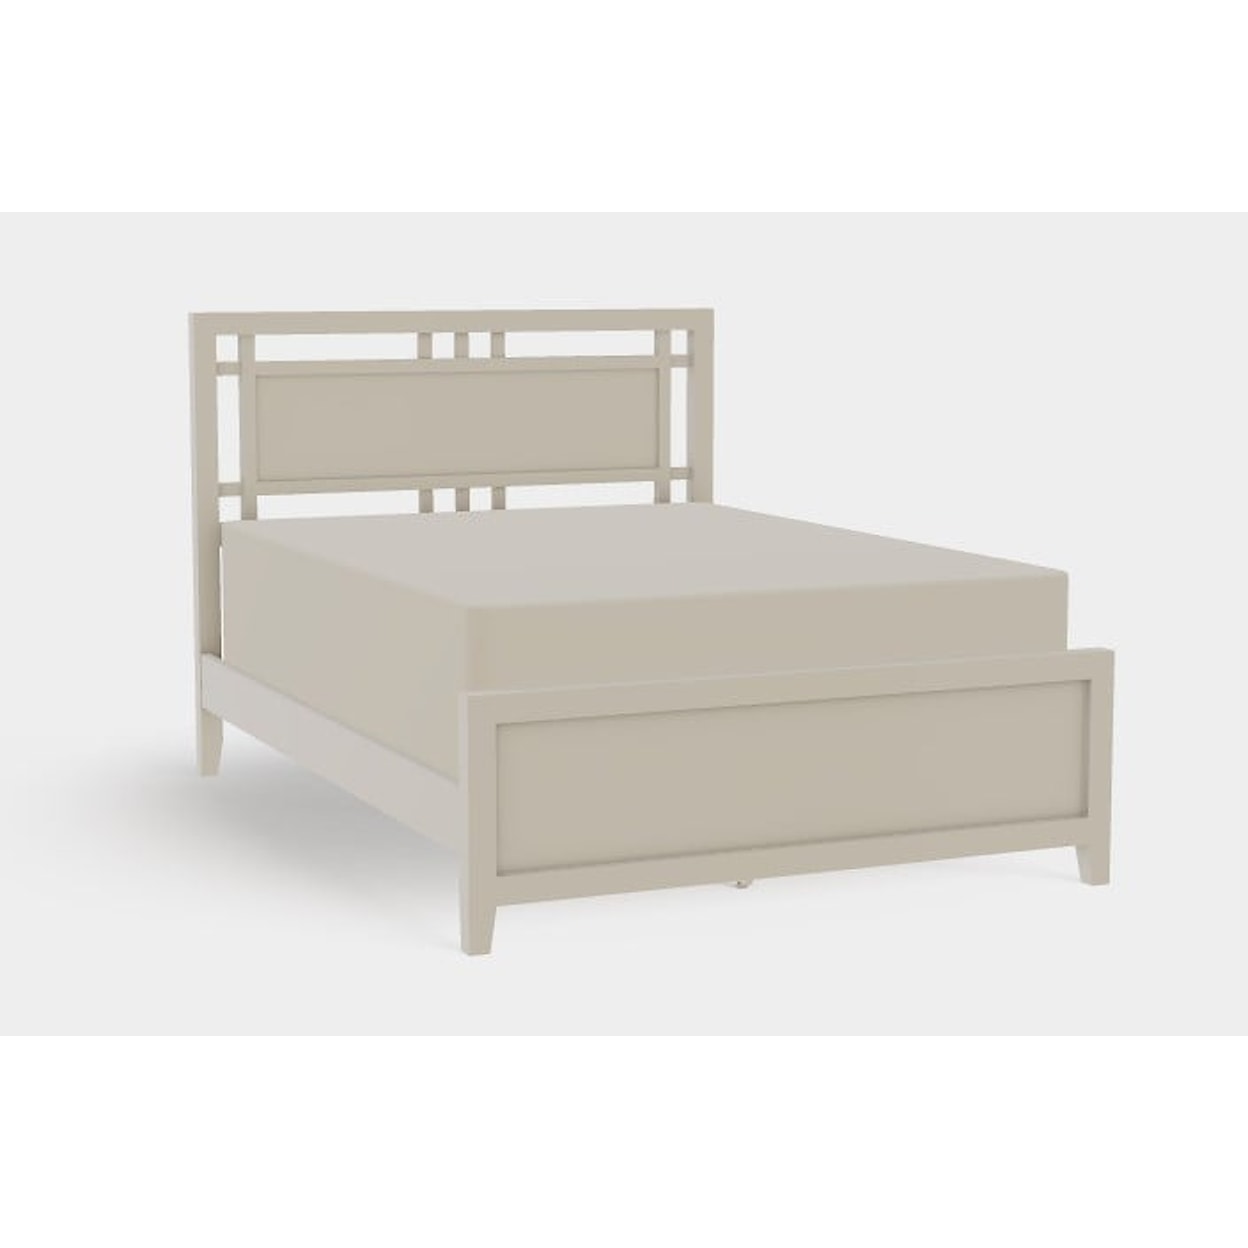 Mavin Atwood Group Atwood Queen Low Footboard Gridwork Bed